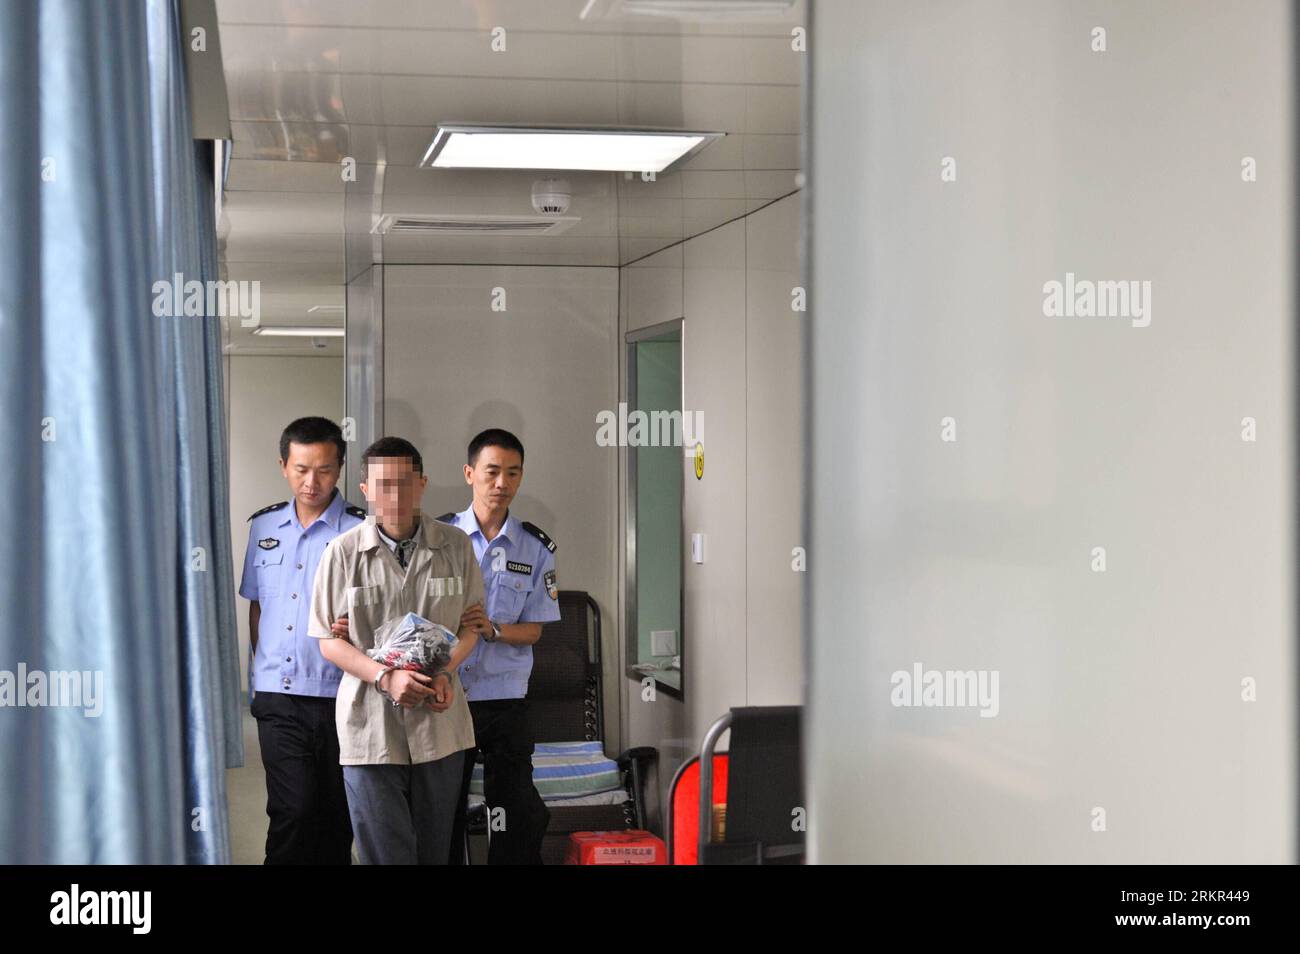 Bildnummer: 58115363  Datum: 18.06.2012  Copyright: imago/Xinhua (120618) -- CHONGQING, June 18, 2012 (Xinhua) -- The prisoner father surnamed Gao (C), escorted by two policemen, walks to his son s room at Xinqiao Hospital in Chongqing, southwest China, June 12, 2012. A family is facing an anxious wait to see whether a bone marrow transplant, made possible by the incarcerated father s rare trans-provincial prison transfer, has saved their son s life. PUBLICATIONxNOTxINxCHN Gesellschaft Fotostory Leukämie Medizin Knochenmarkspende Stammzellen Stammzellentherapie Spende xjh x2x 2012 quer     581 Stock Photo